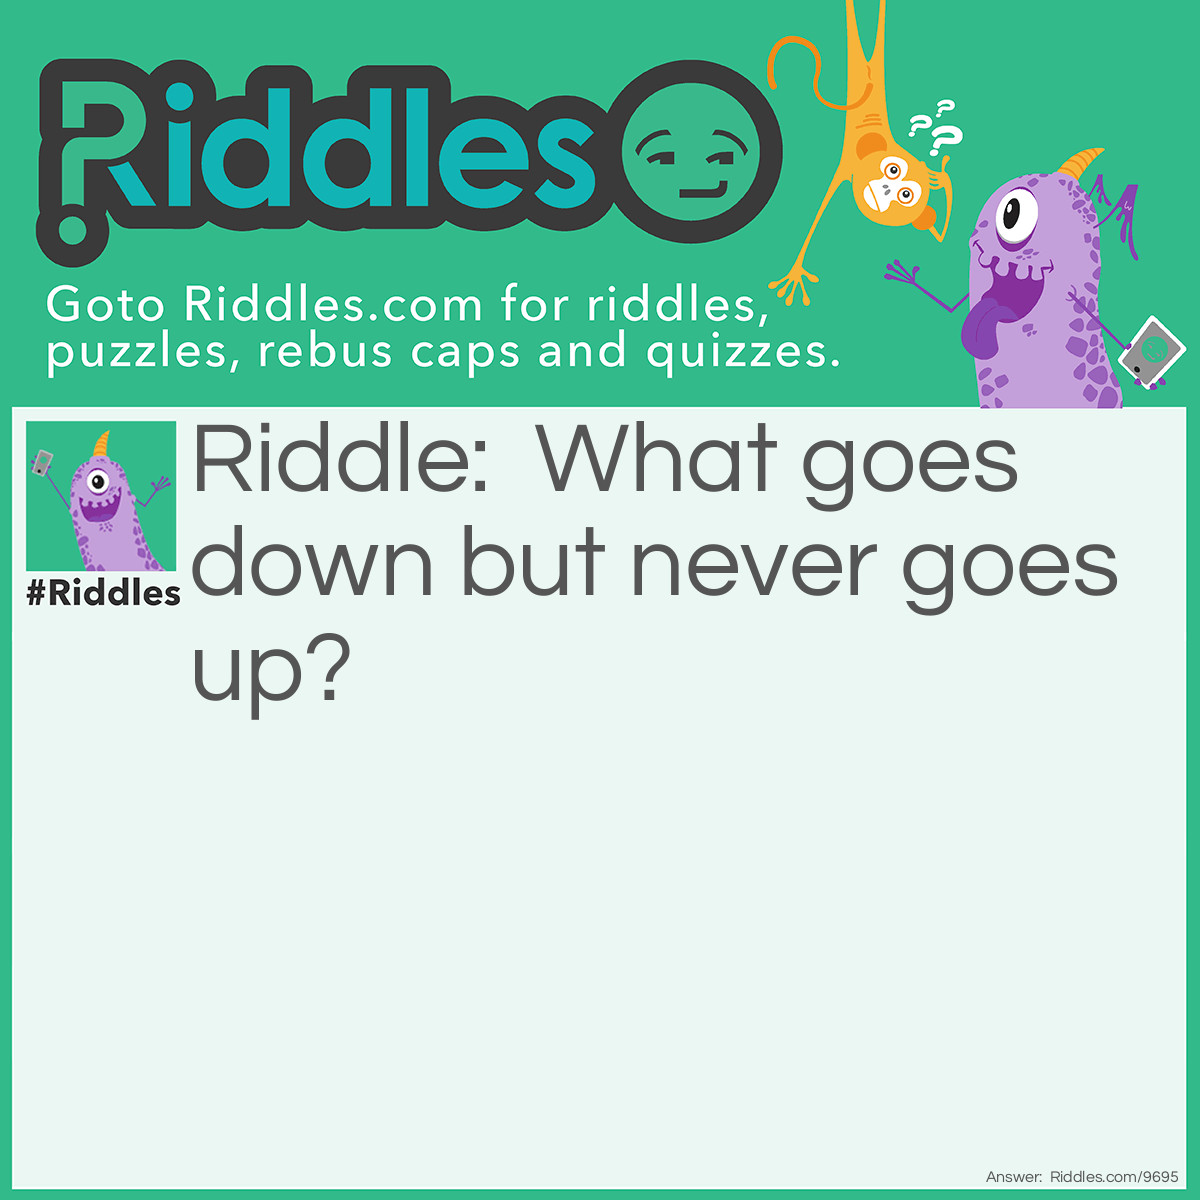 Riddle: What goes down but never goes up? Answer: Rain